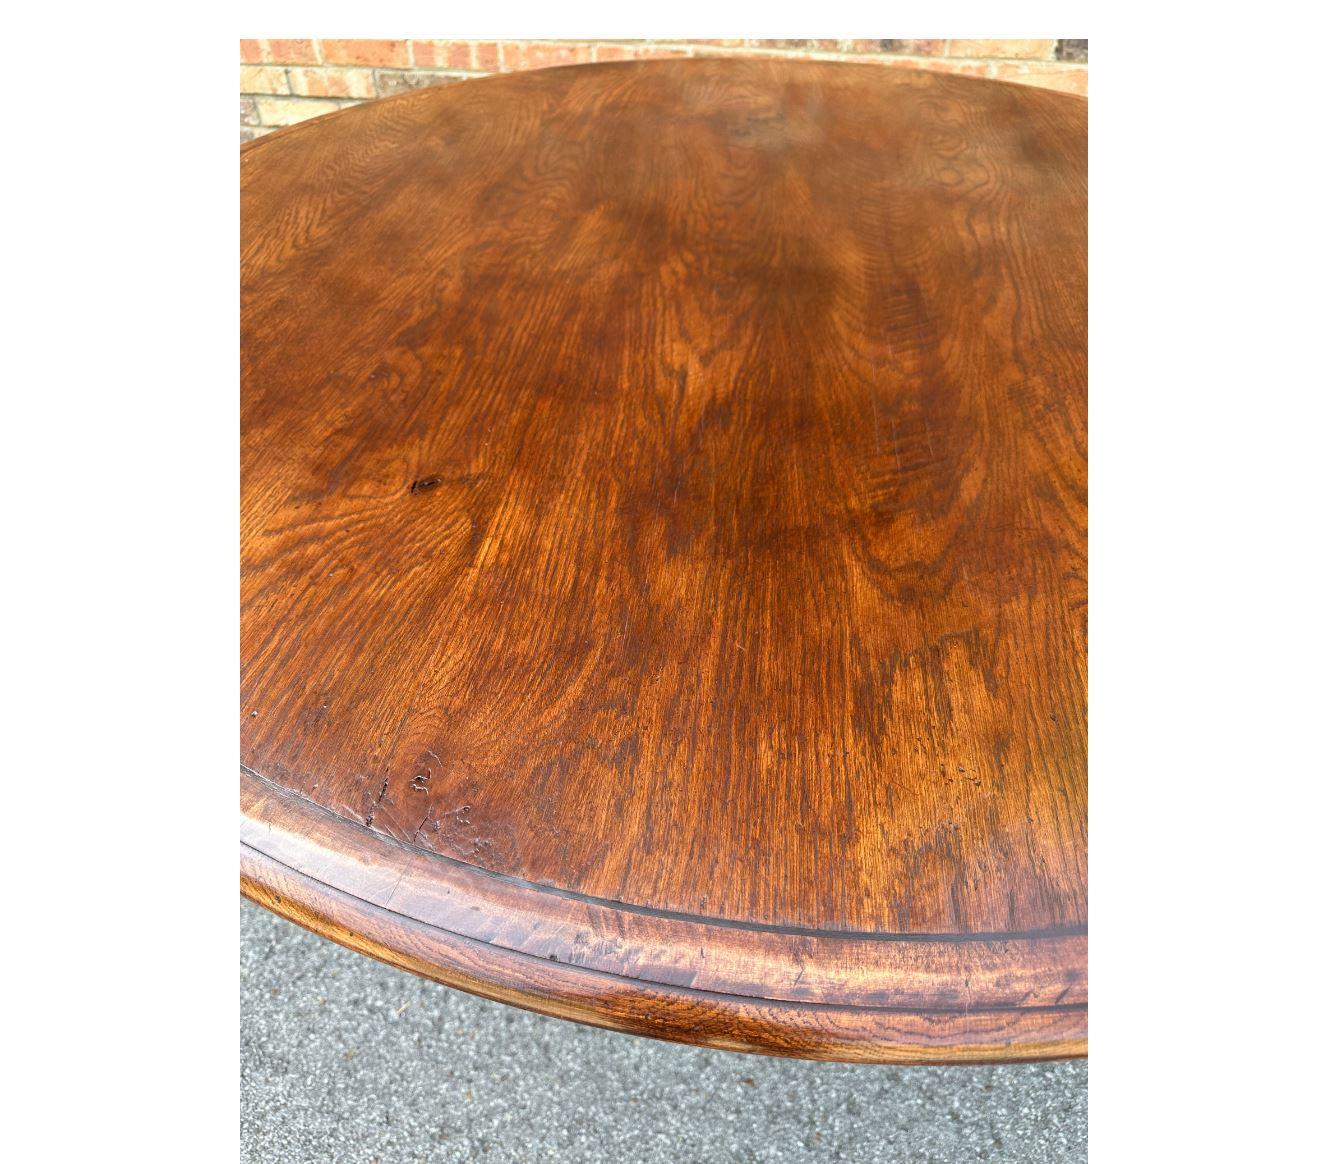 This is a beautiful custom-made dining table from England! The wood has lovely natural designs and is a gorgeous warm tone. Very simple, yet elegant design with round top and pedestal base. This table would make an excellent addition to your dining